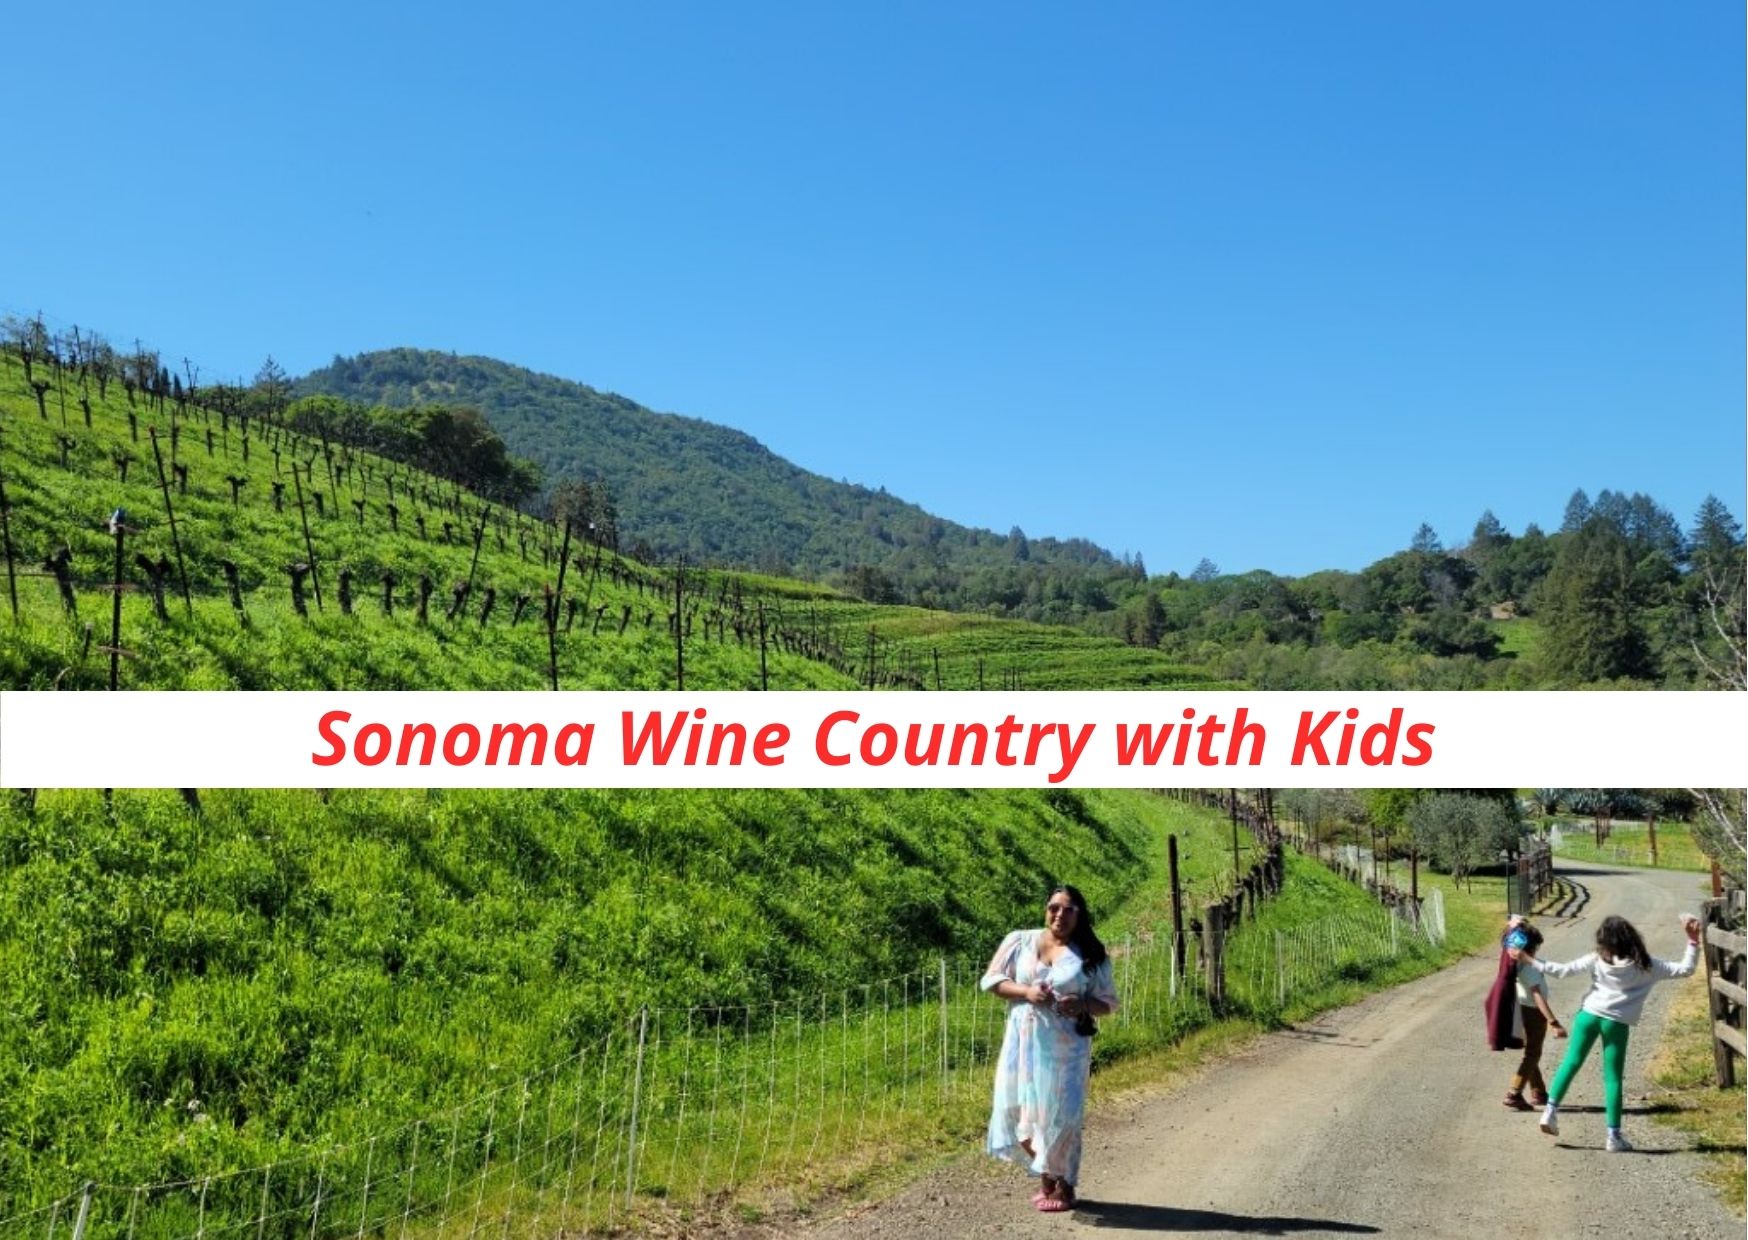 mom standing with a glass of wine in hand at a Sonoma winery with kids running in background